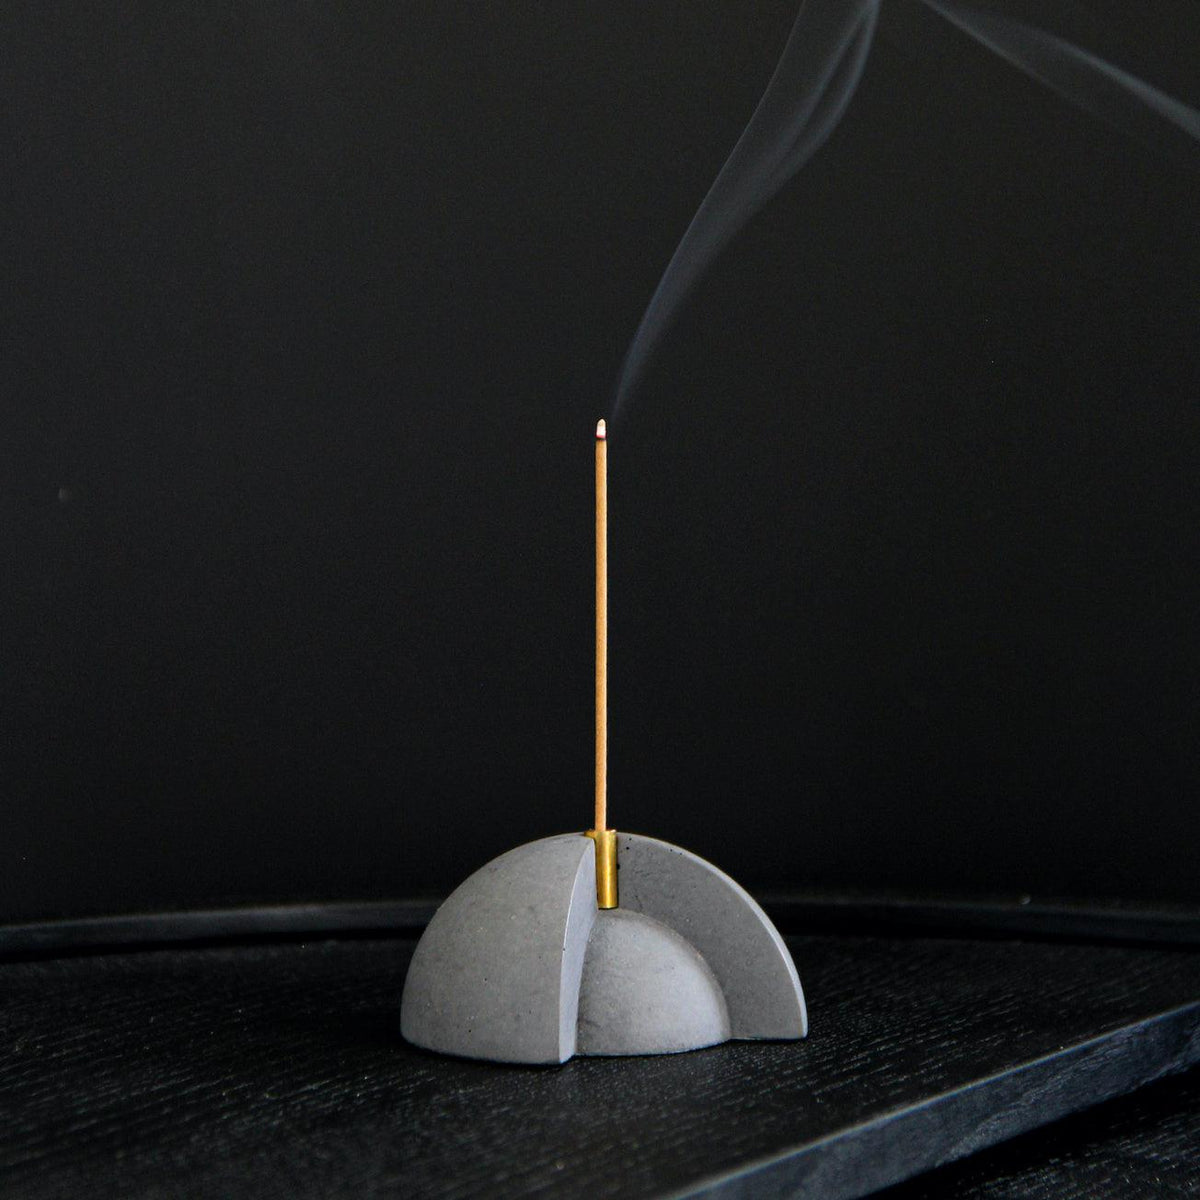 Core Incense Holder by Kin Objects against black background